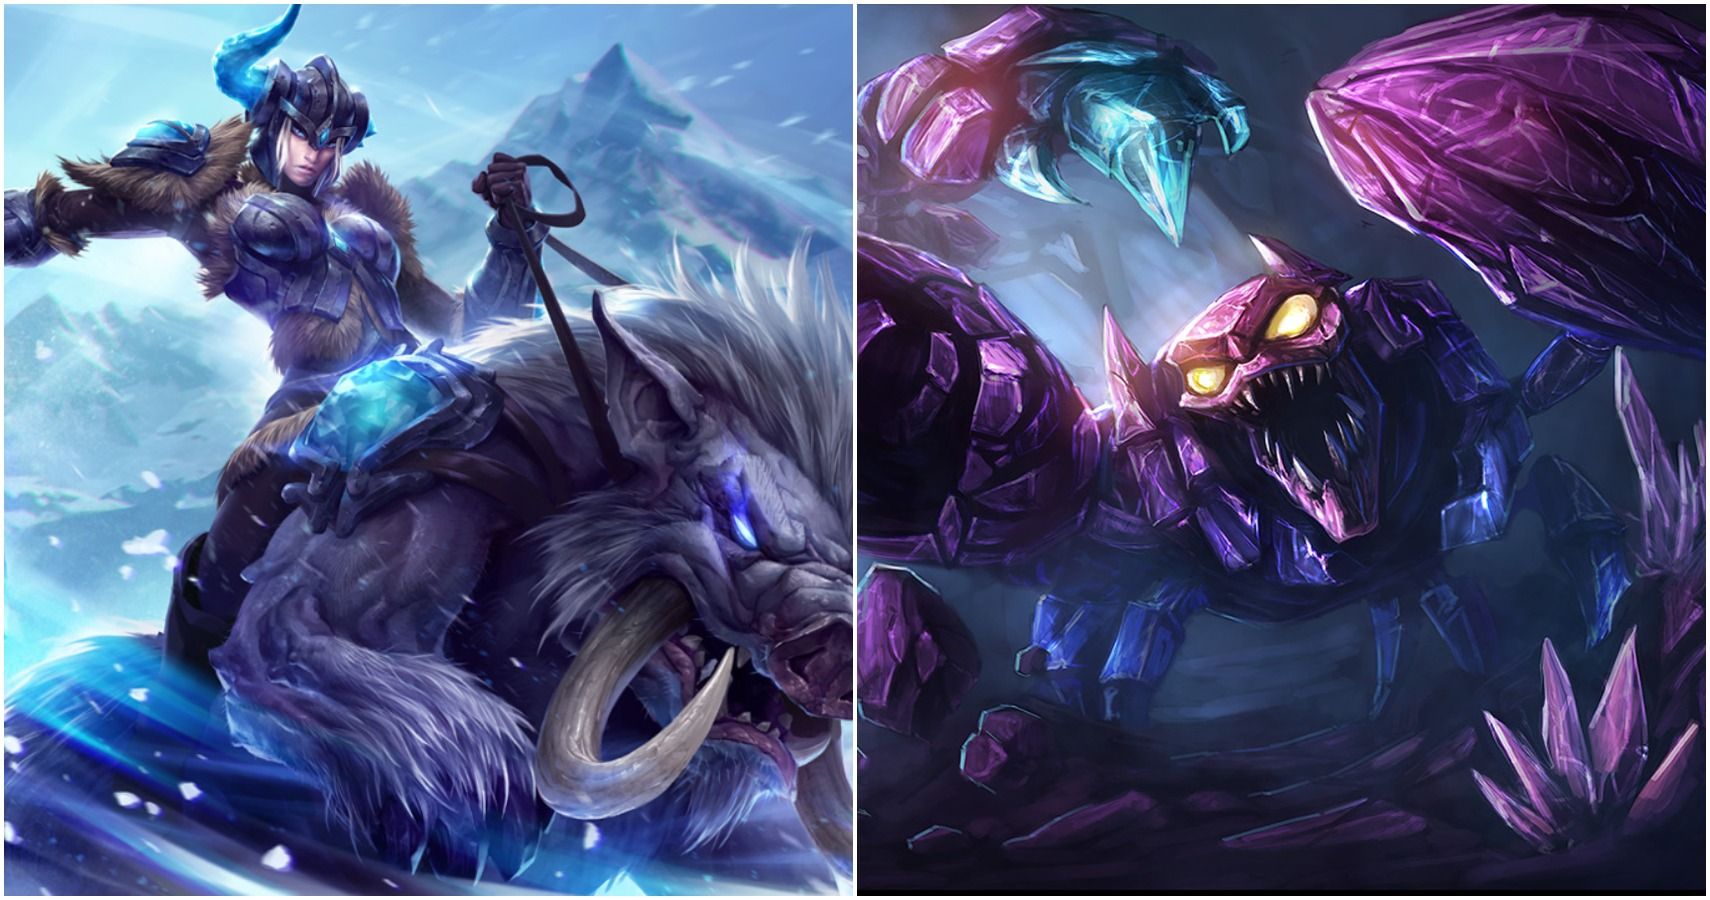 Junglers Sejuani and Skarner in their Splash Art from League of Legends